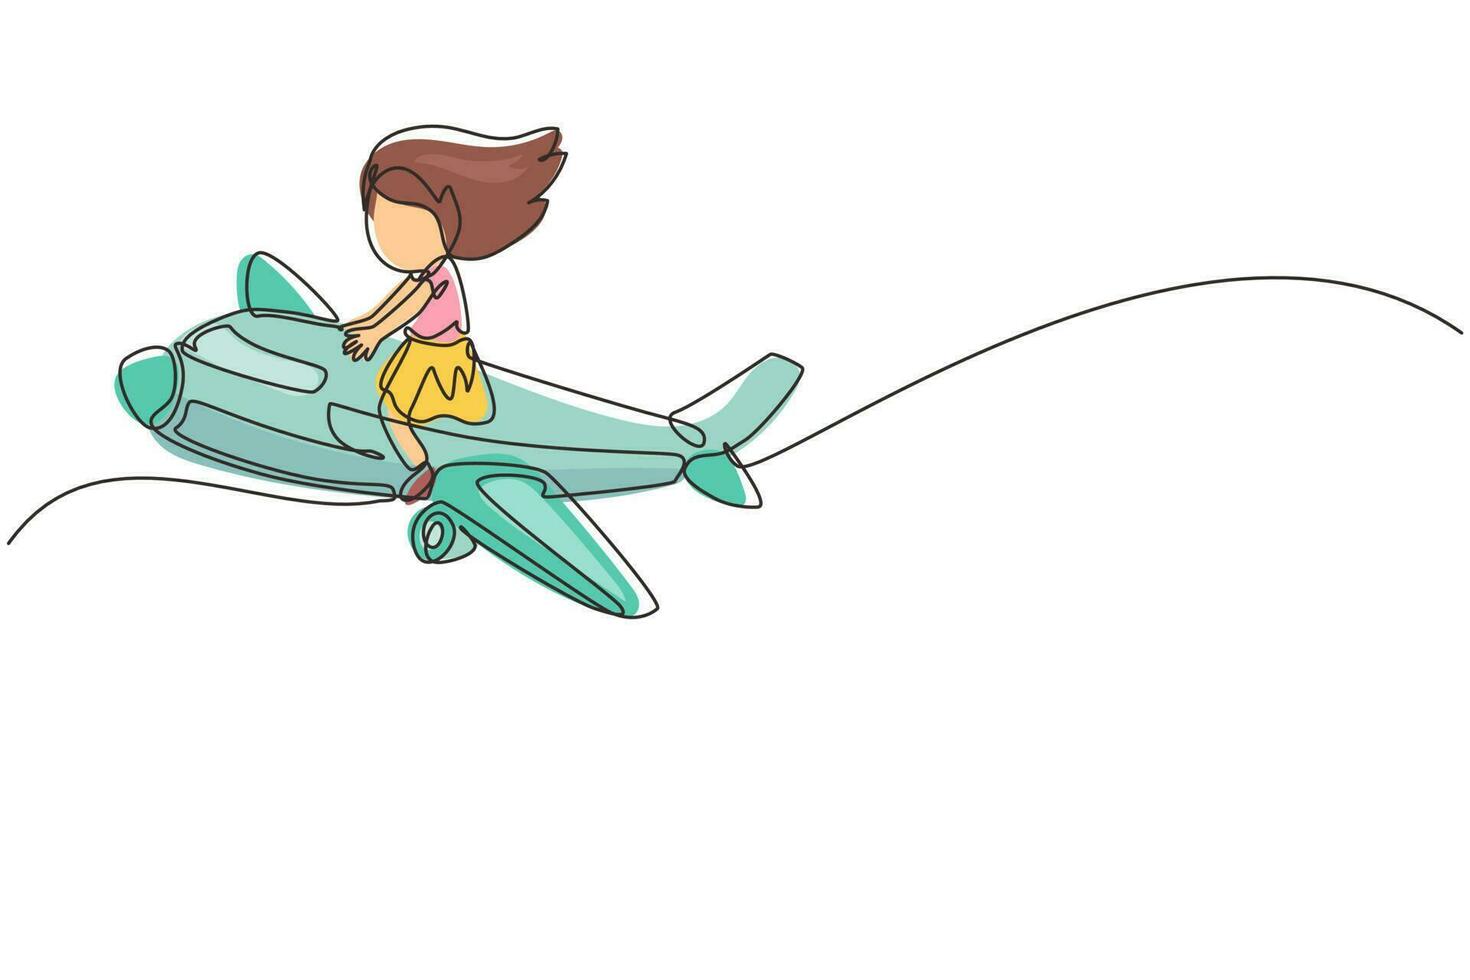 Single one line drawing cute little girl riding plane. Happy kids on airplane. Children riding airplane, summer journey, travel concept. Modern continuous line draw design graphic vector illustration